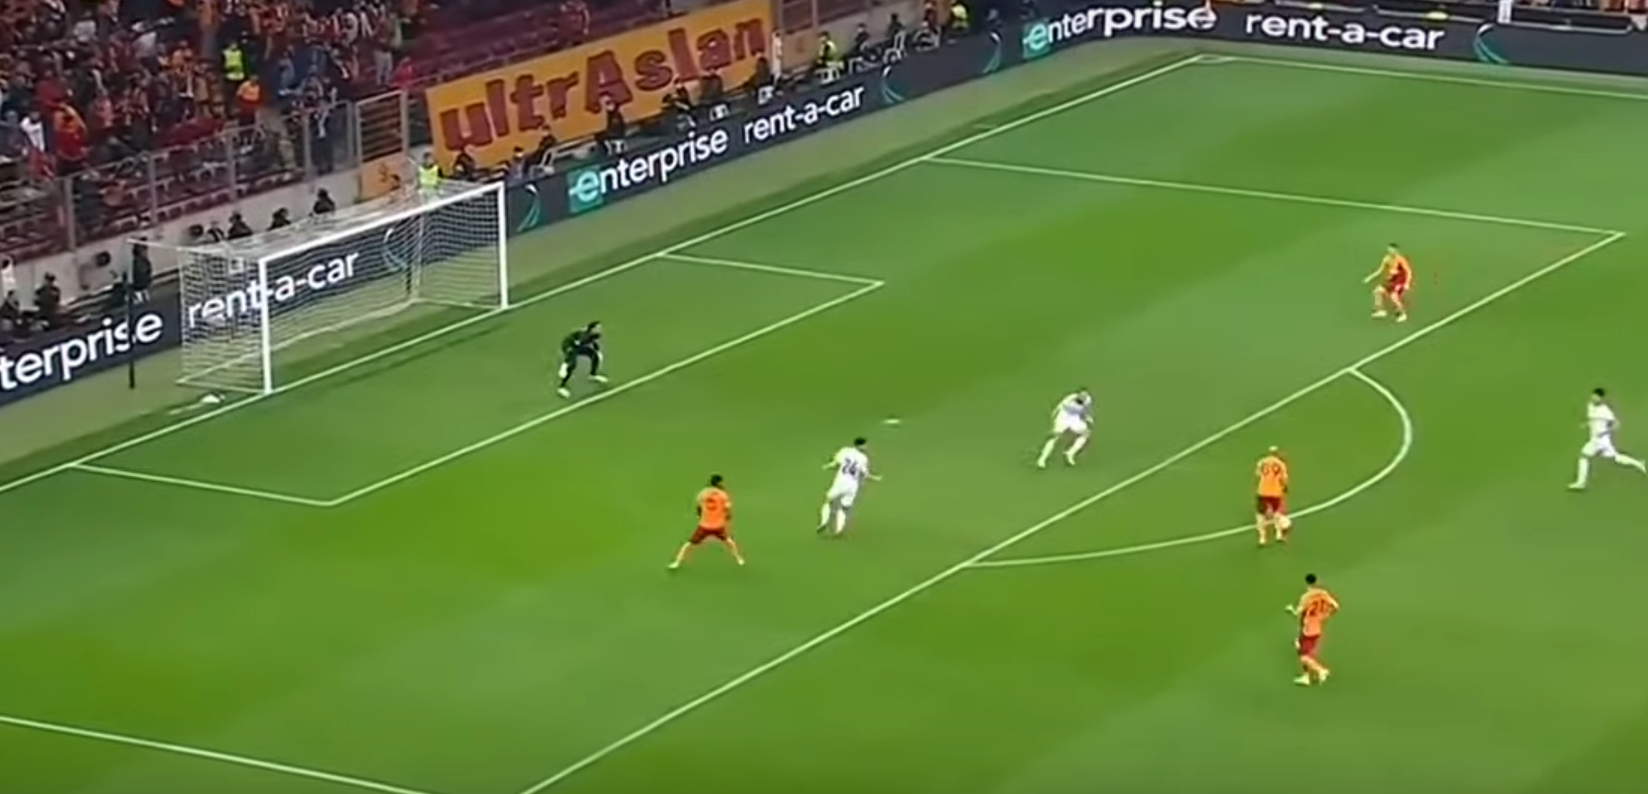 Feghouli has turned on the ball on the edge of the D; there is a teammate open in the box wide right